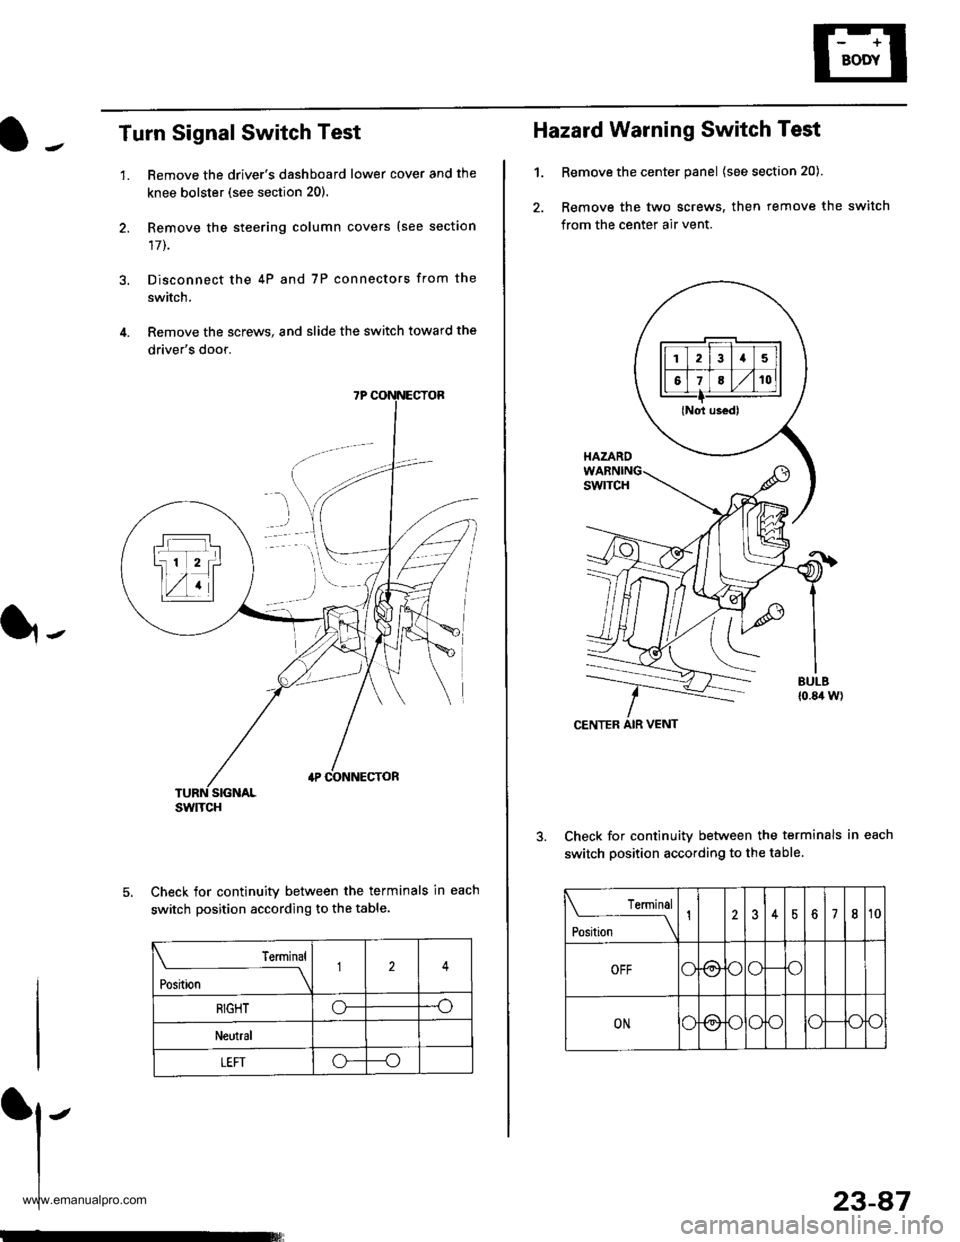 HONDA CR-V 1997 RD1-RD3 / 1.G User Guide 
Turn Signal Switch Test
1.
4.
Remove the drivers dashboard lower cover and the
knee bolster (see section 20).
Remove the steering column covers {see section
17]-.
Disconnect the 4P and 7P connectors